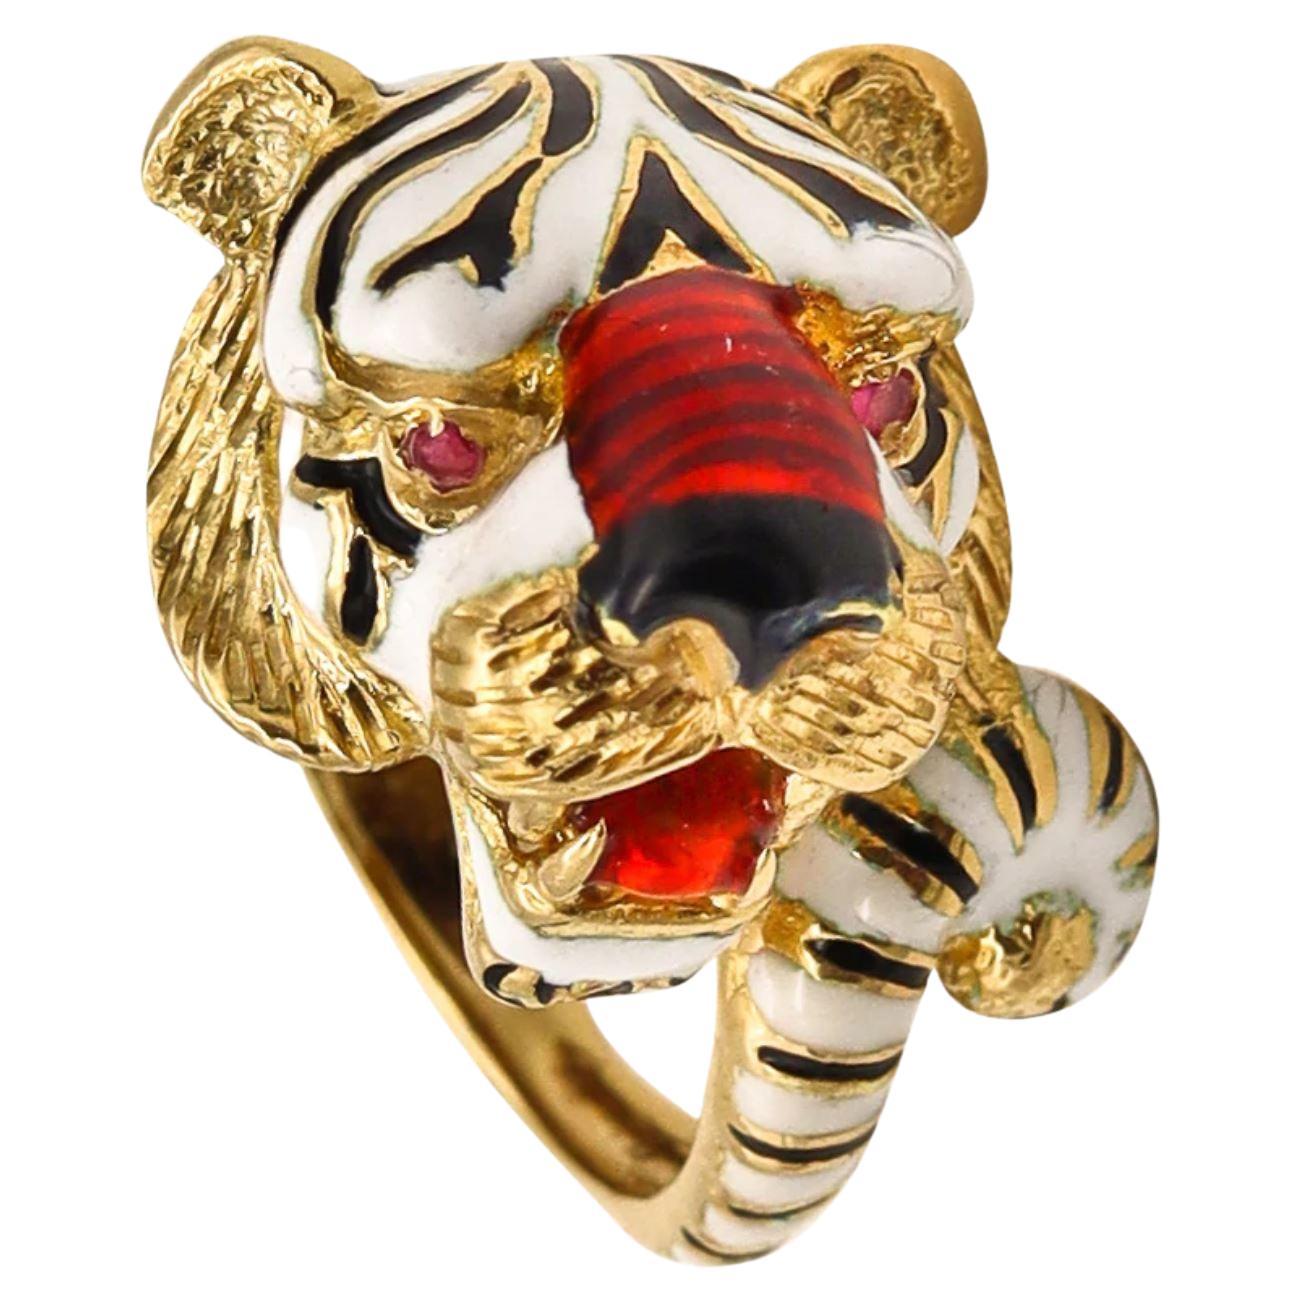 Frascarolo Milano Enameled Tiger Cocktail Ring in 18Kt Yellow Gold with Rubies